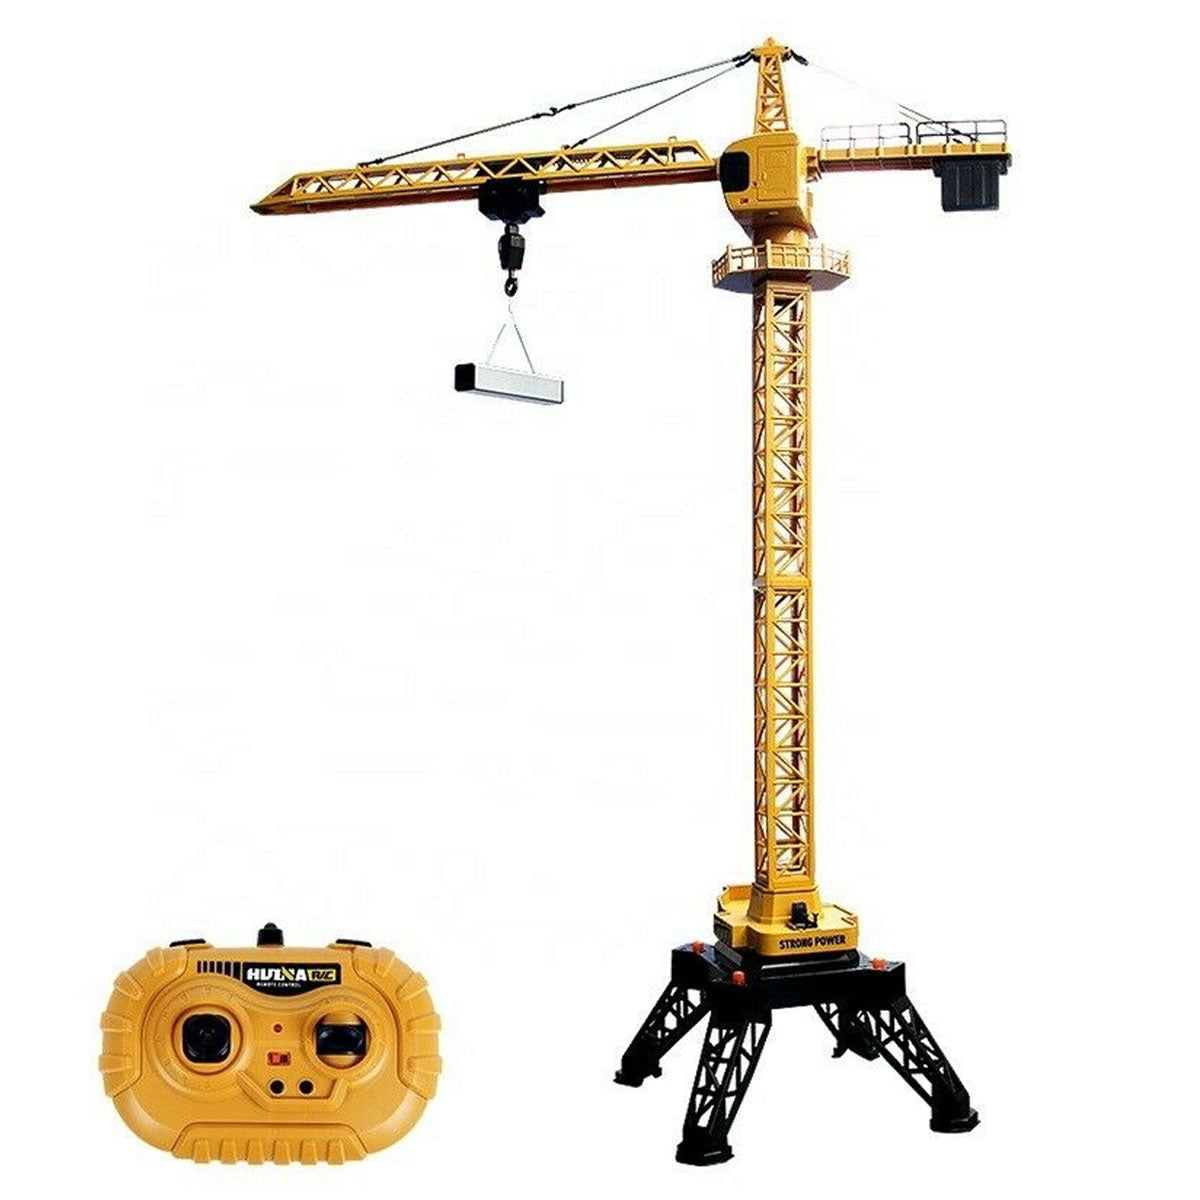 HUINA 1/14 12CH RC Alloy Tower Crane Engineering Construction Vehicle Toy Kids Car